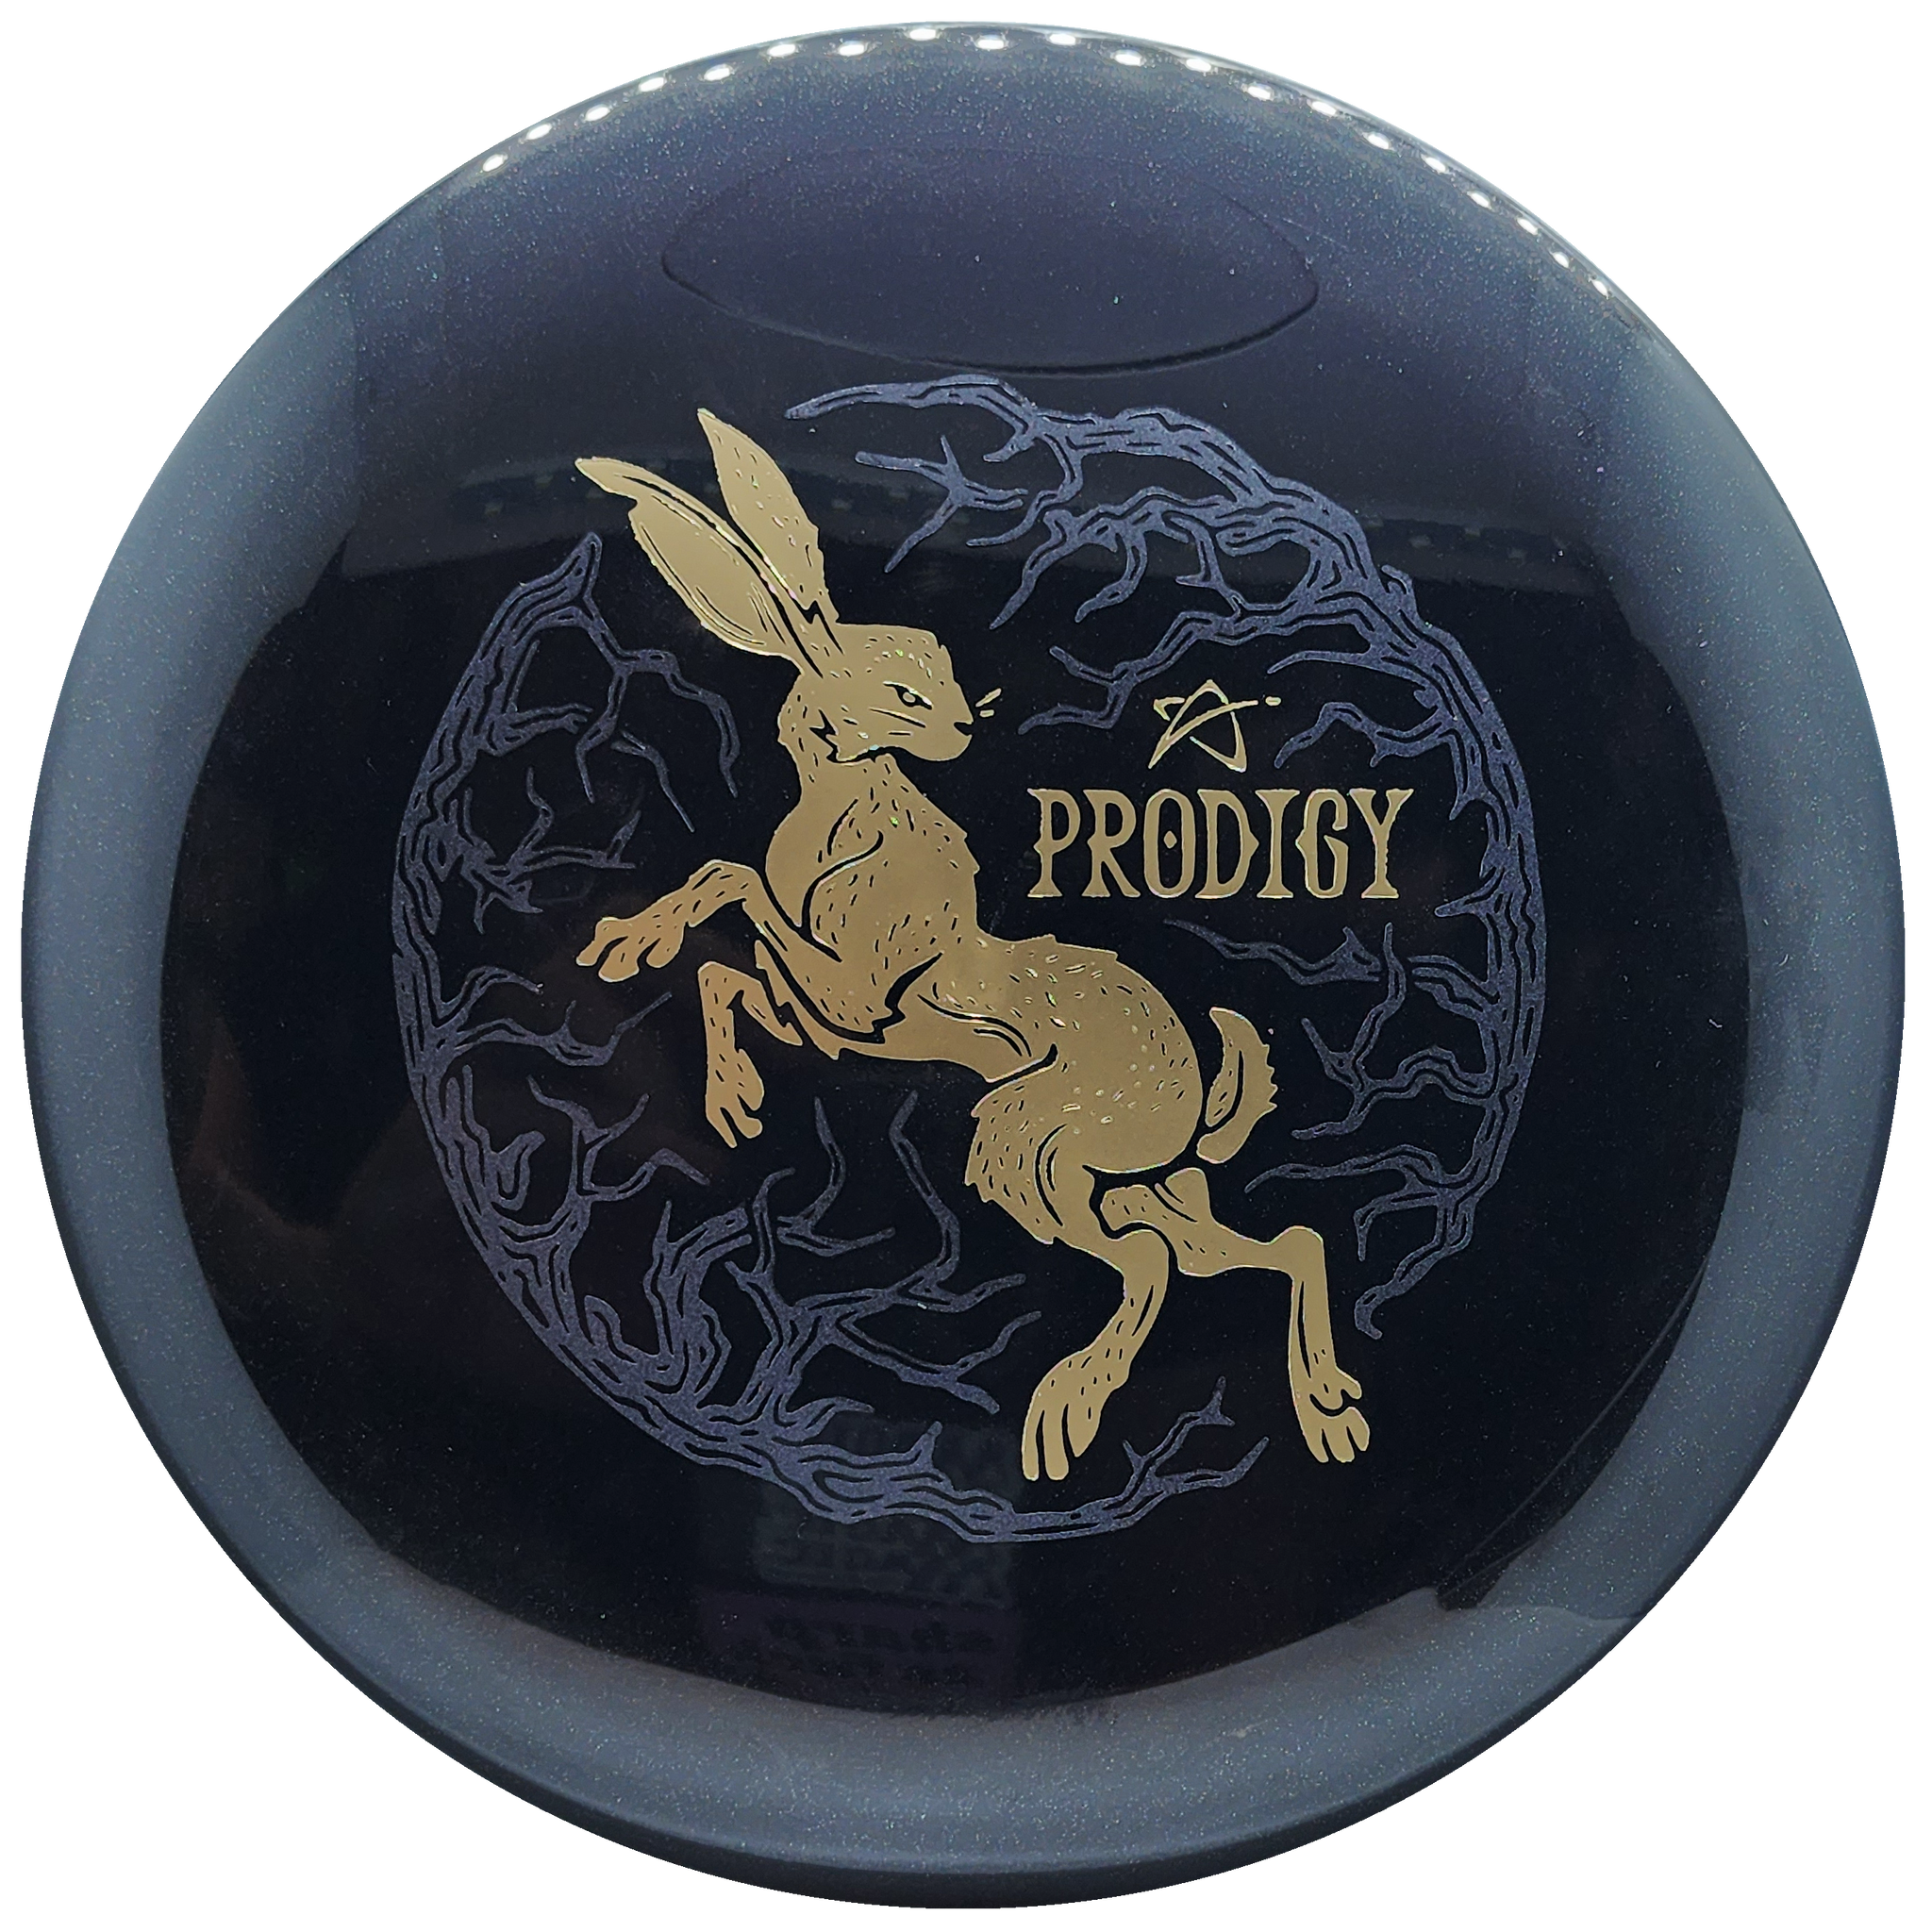 Prodigy: PA-5 Putt & Approach Disc - Thicket Stamp - 500 Plastic - Black/Grey/Gold